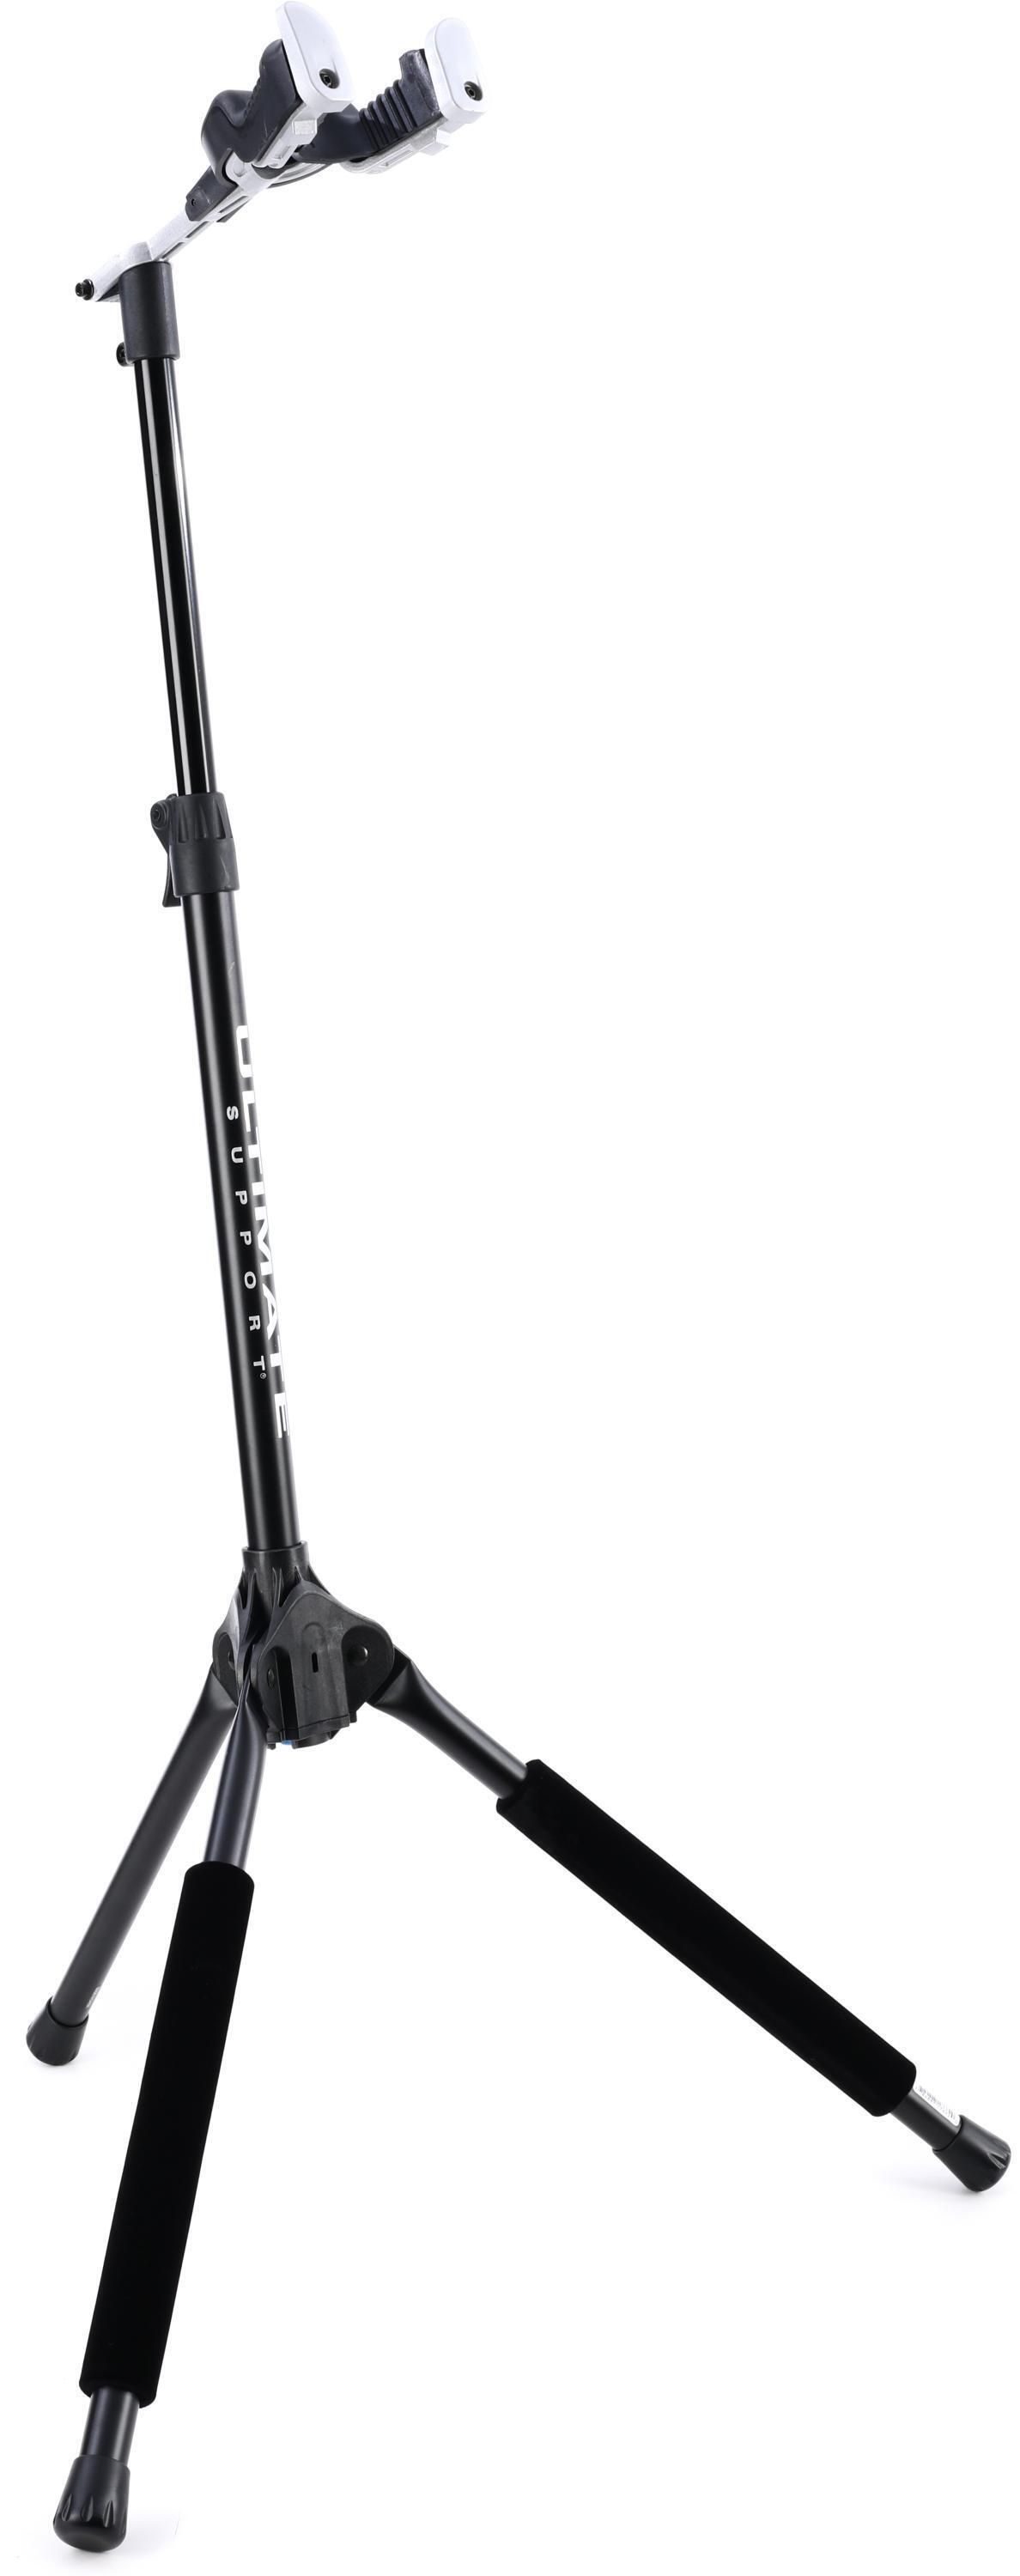 Bundled Item: Ultimate Support GS-1000 Pro+ Guitar Stand